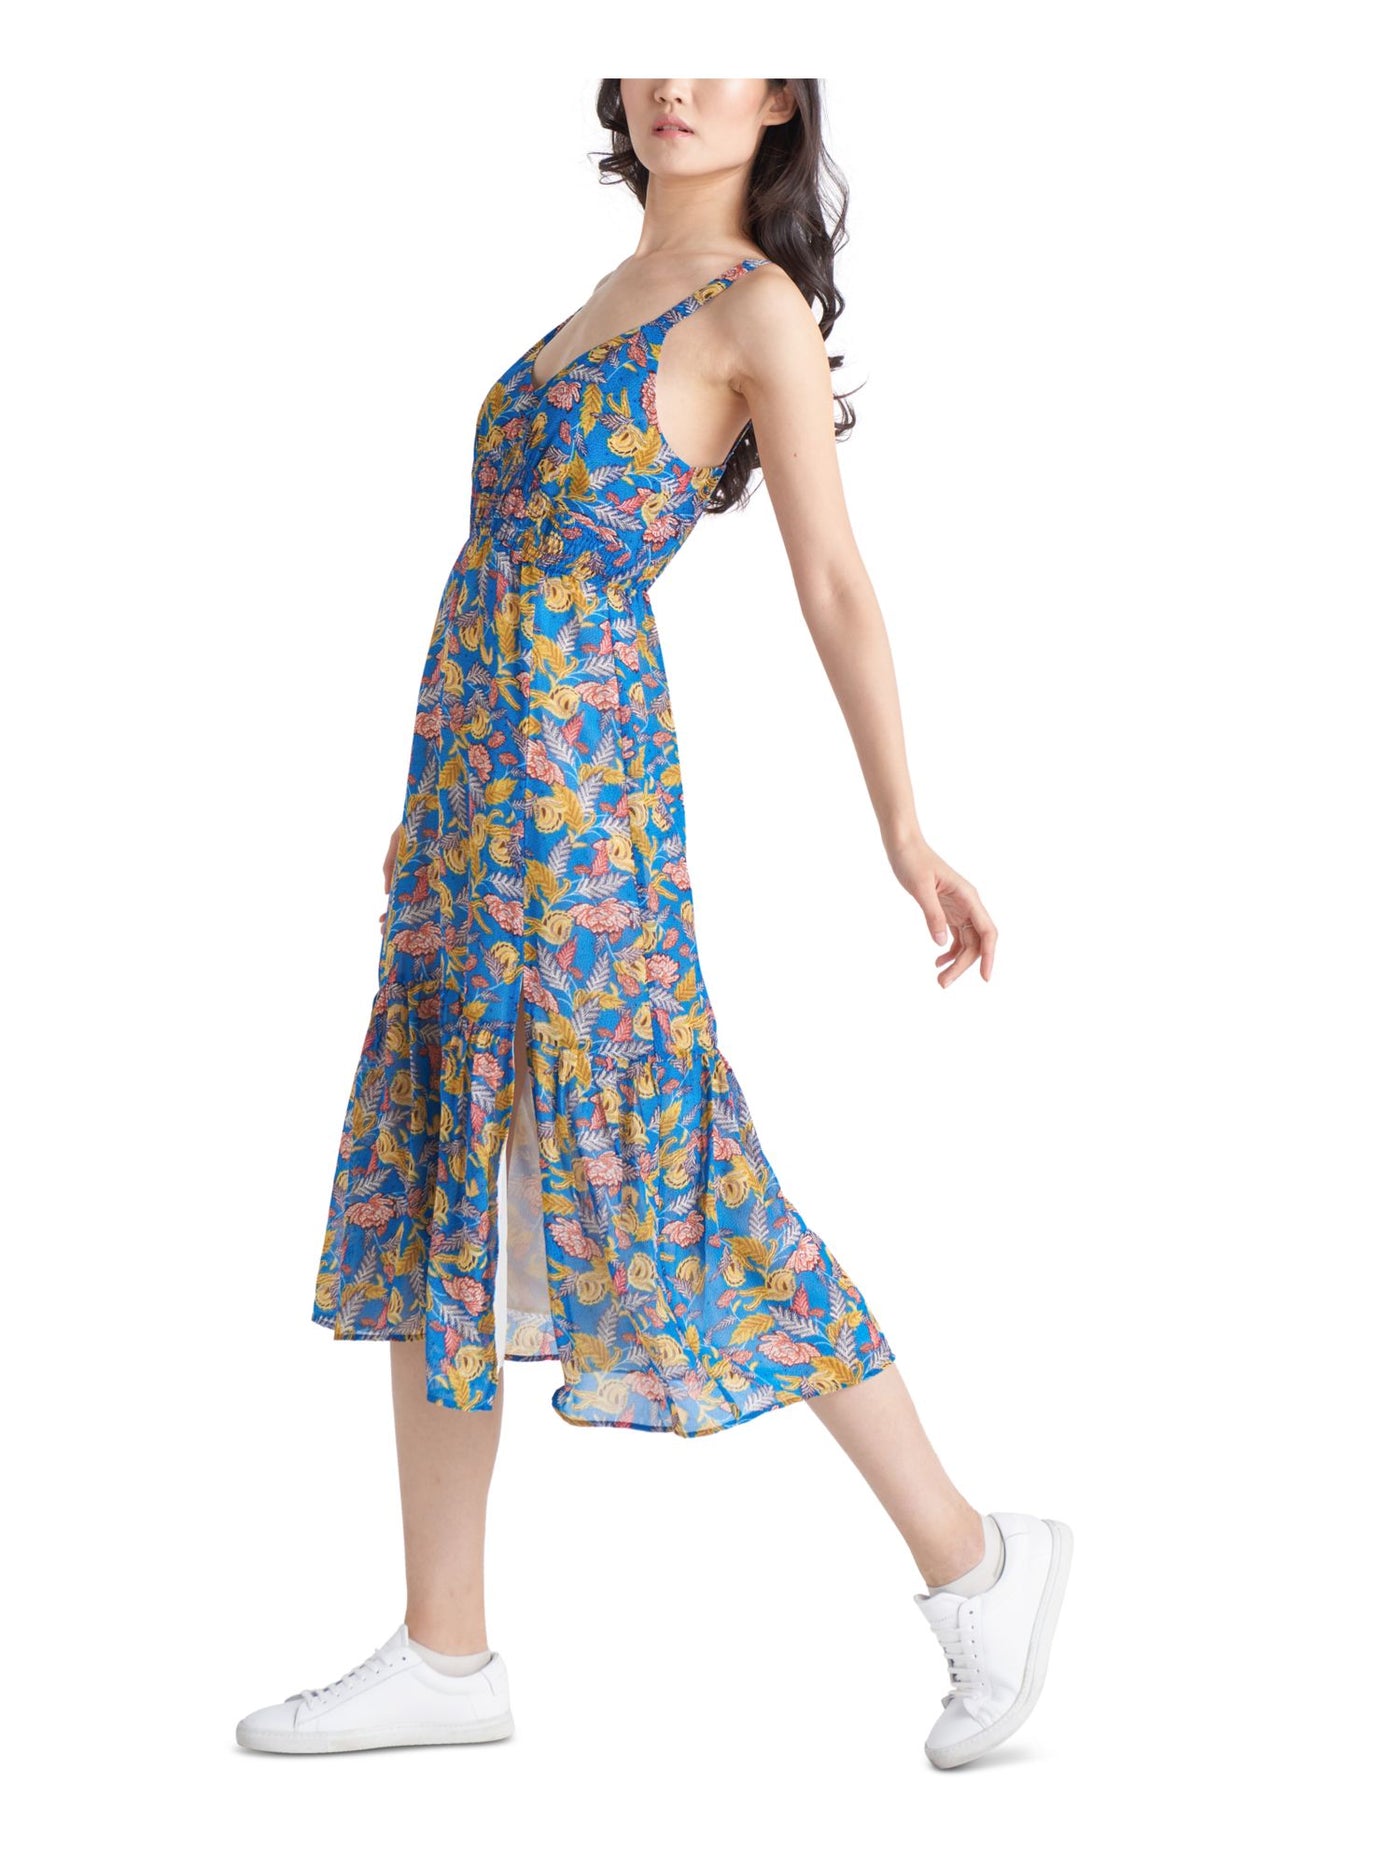 BLACK TAPE Womens Blue Smocked Slitted Tiered Skirt Lined Printed Sleeveless V Neck Midi Fit + Flare Dress XS